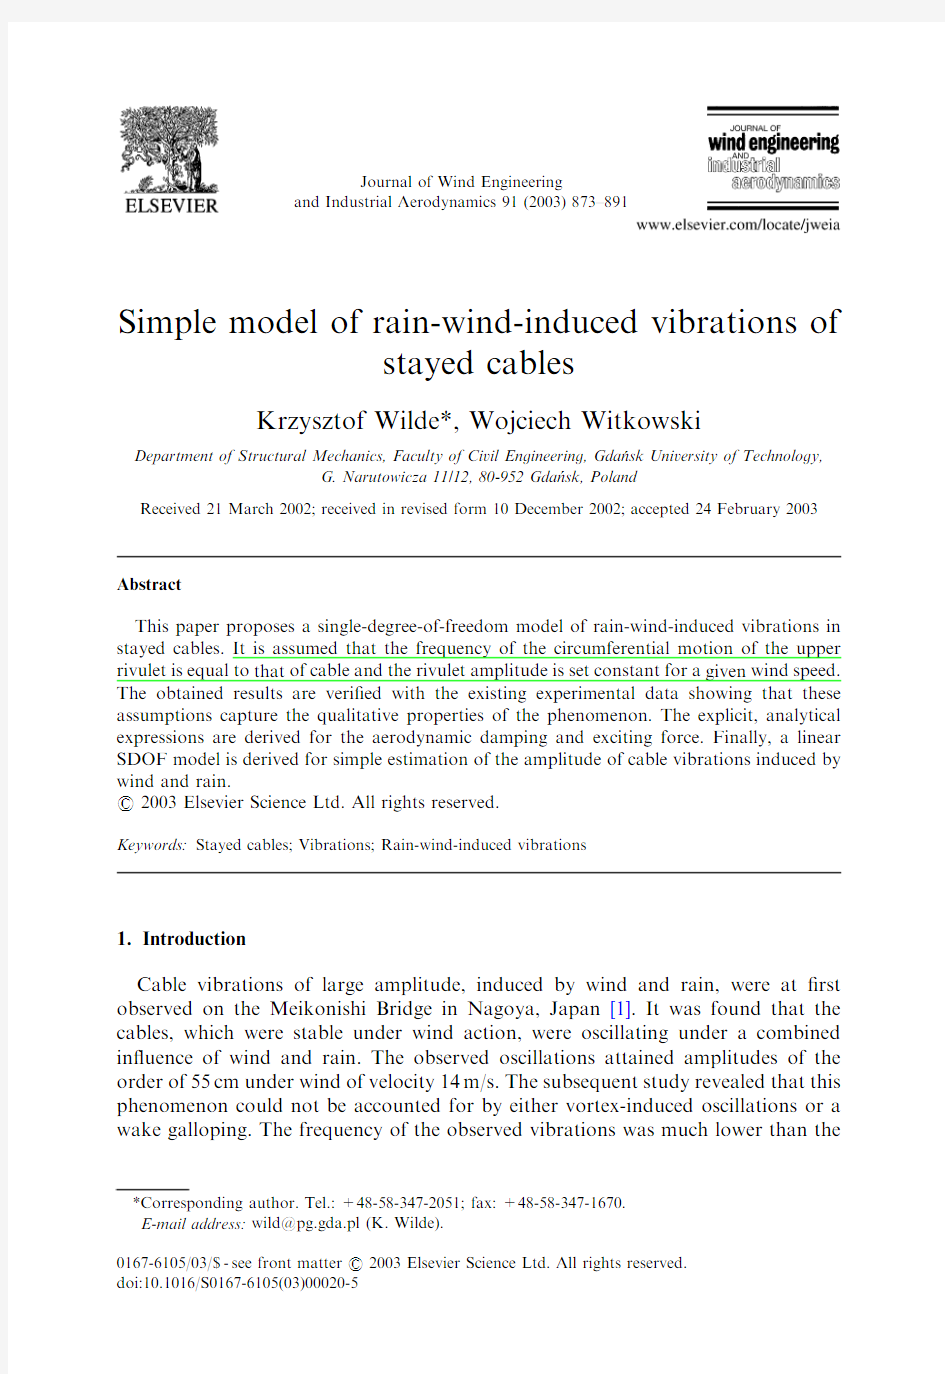 Krzysztof Wilde：Simple model of rain-wind-induced vibrations of stayed cables